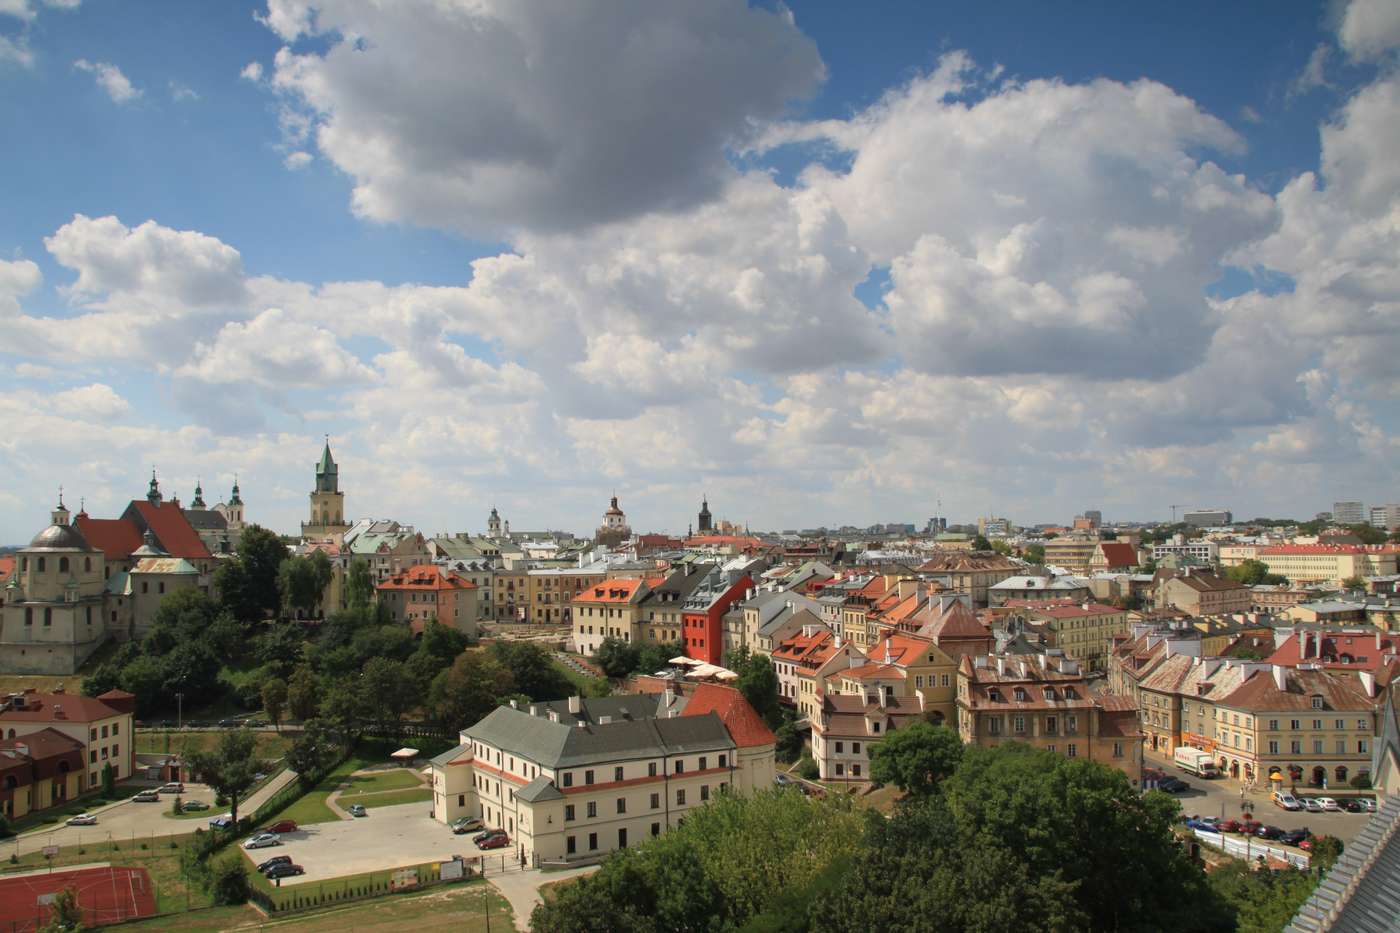 Discover your piece of Lublin.